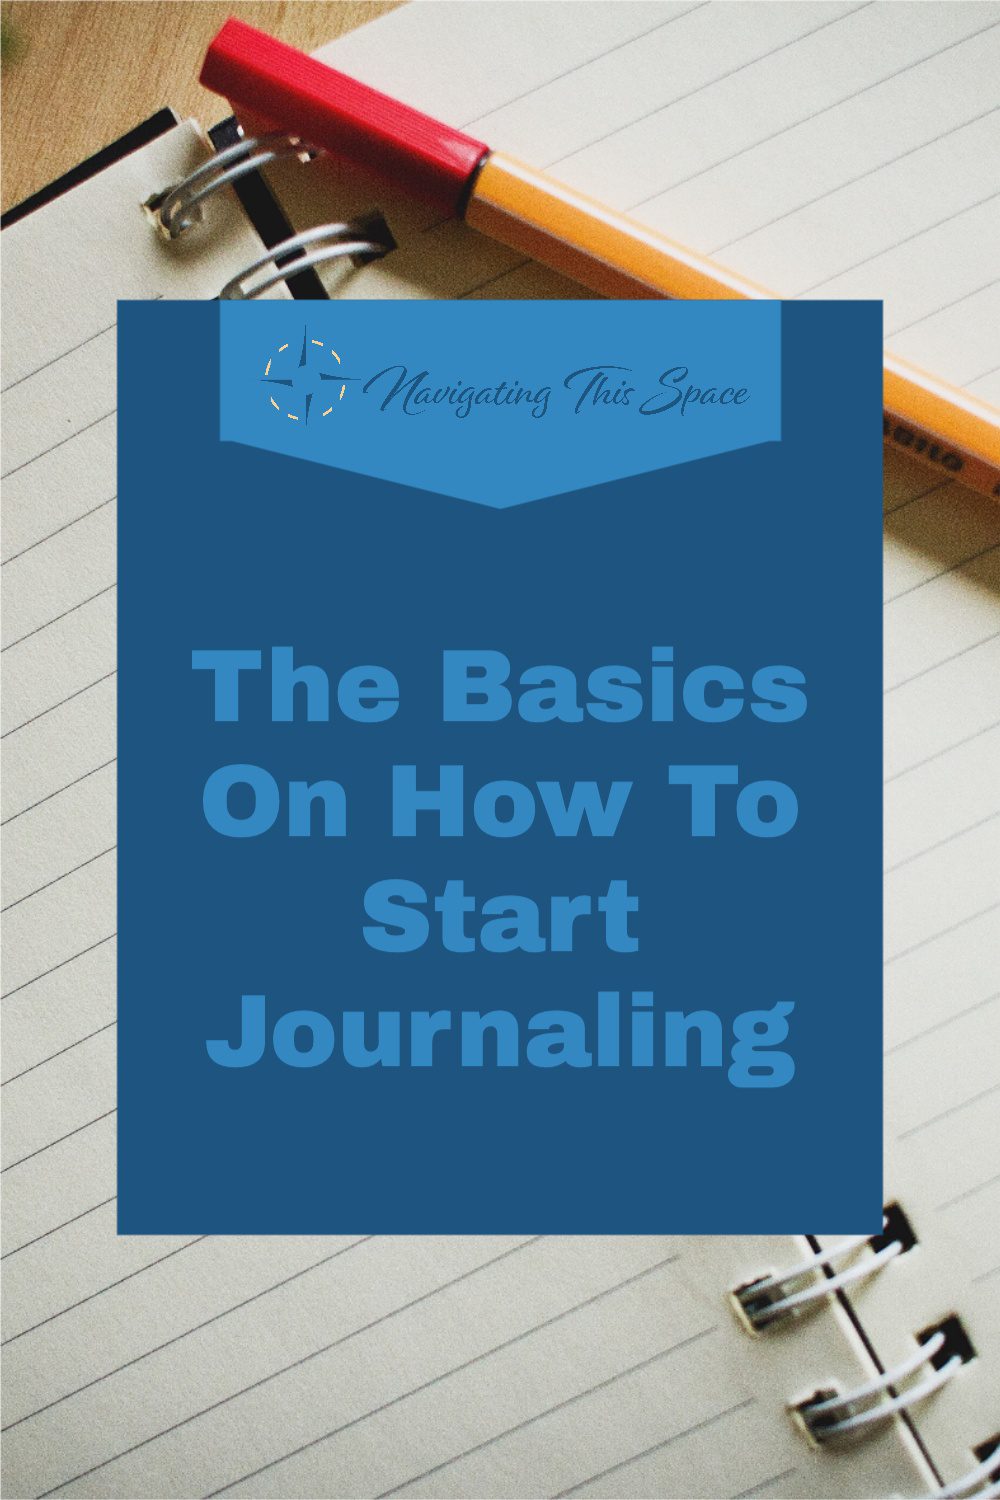 The Basics on how to start journaling